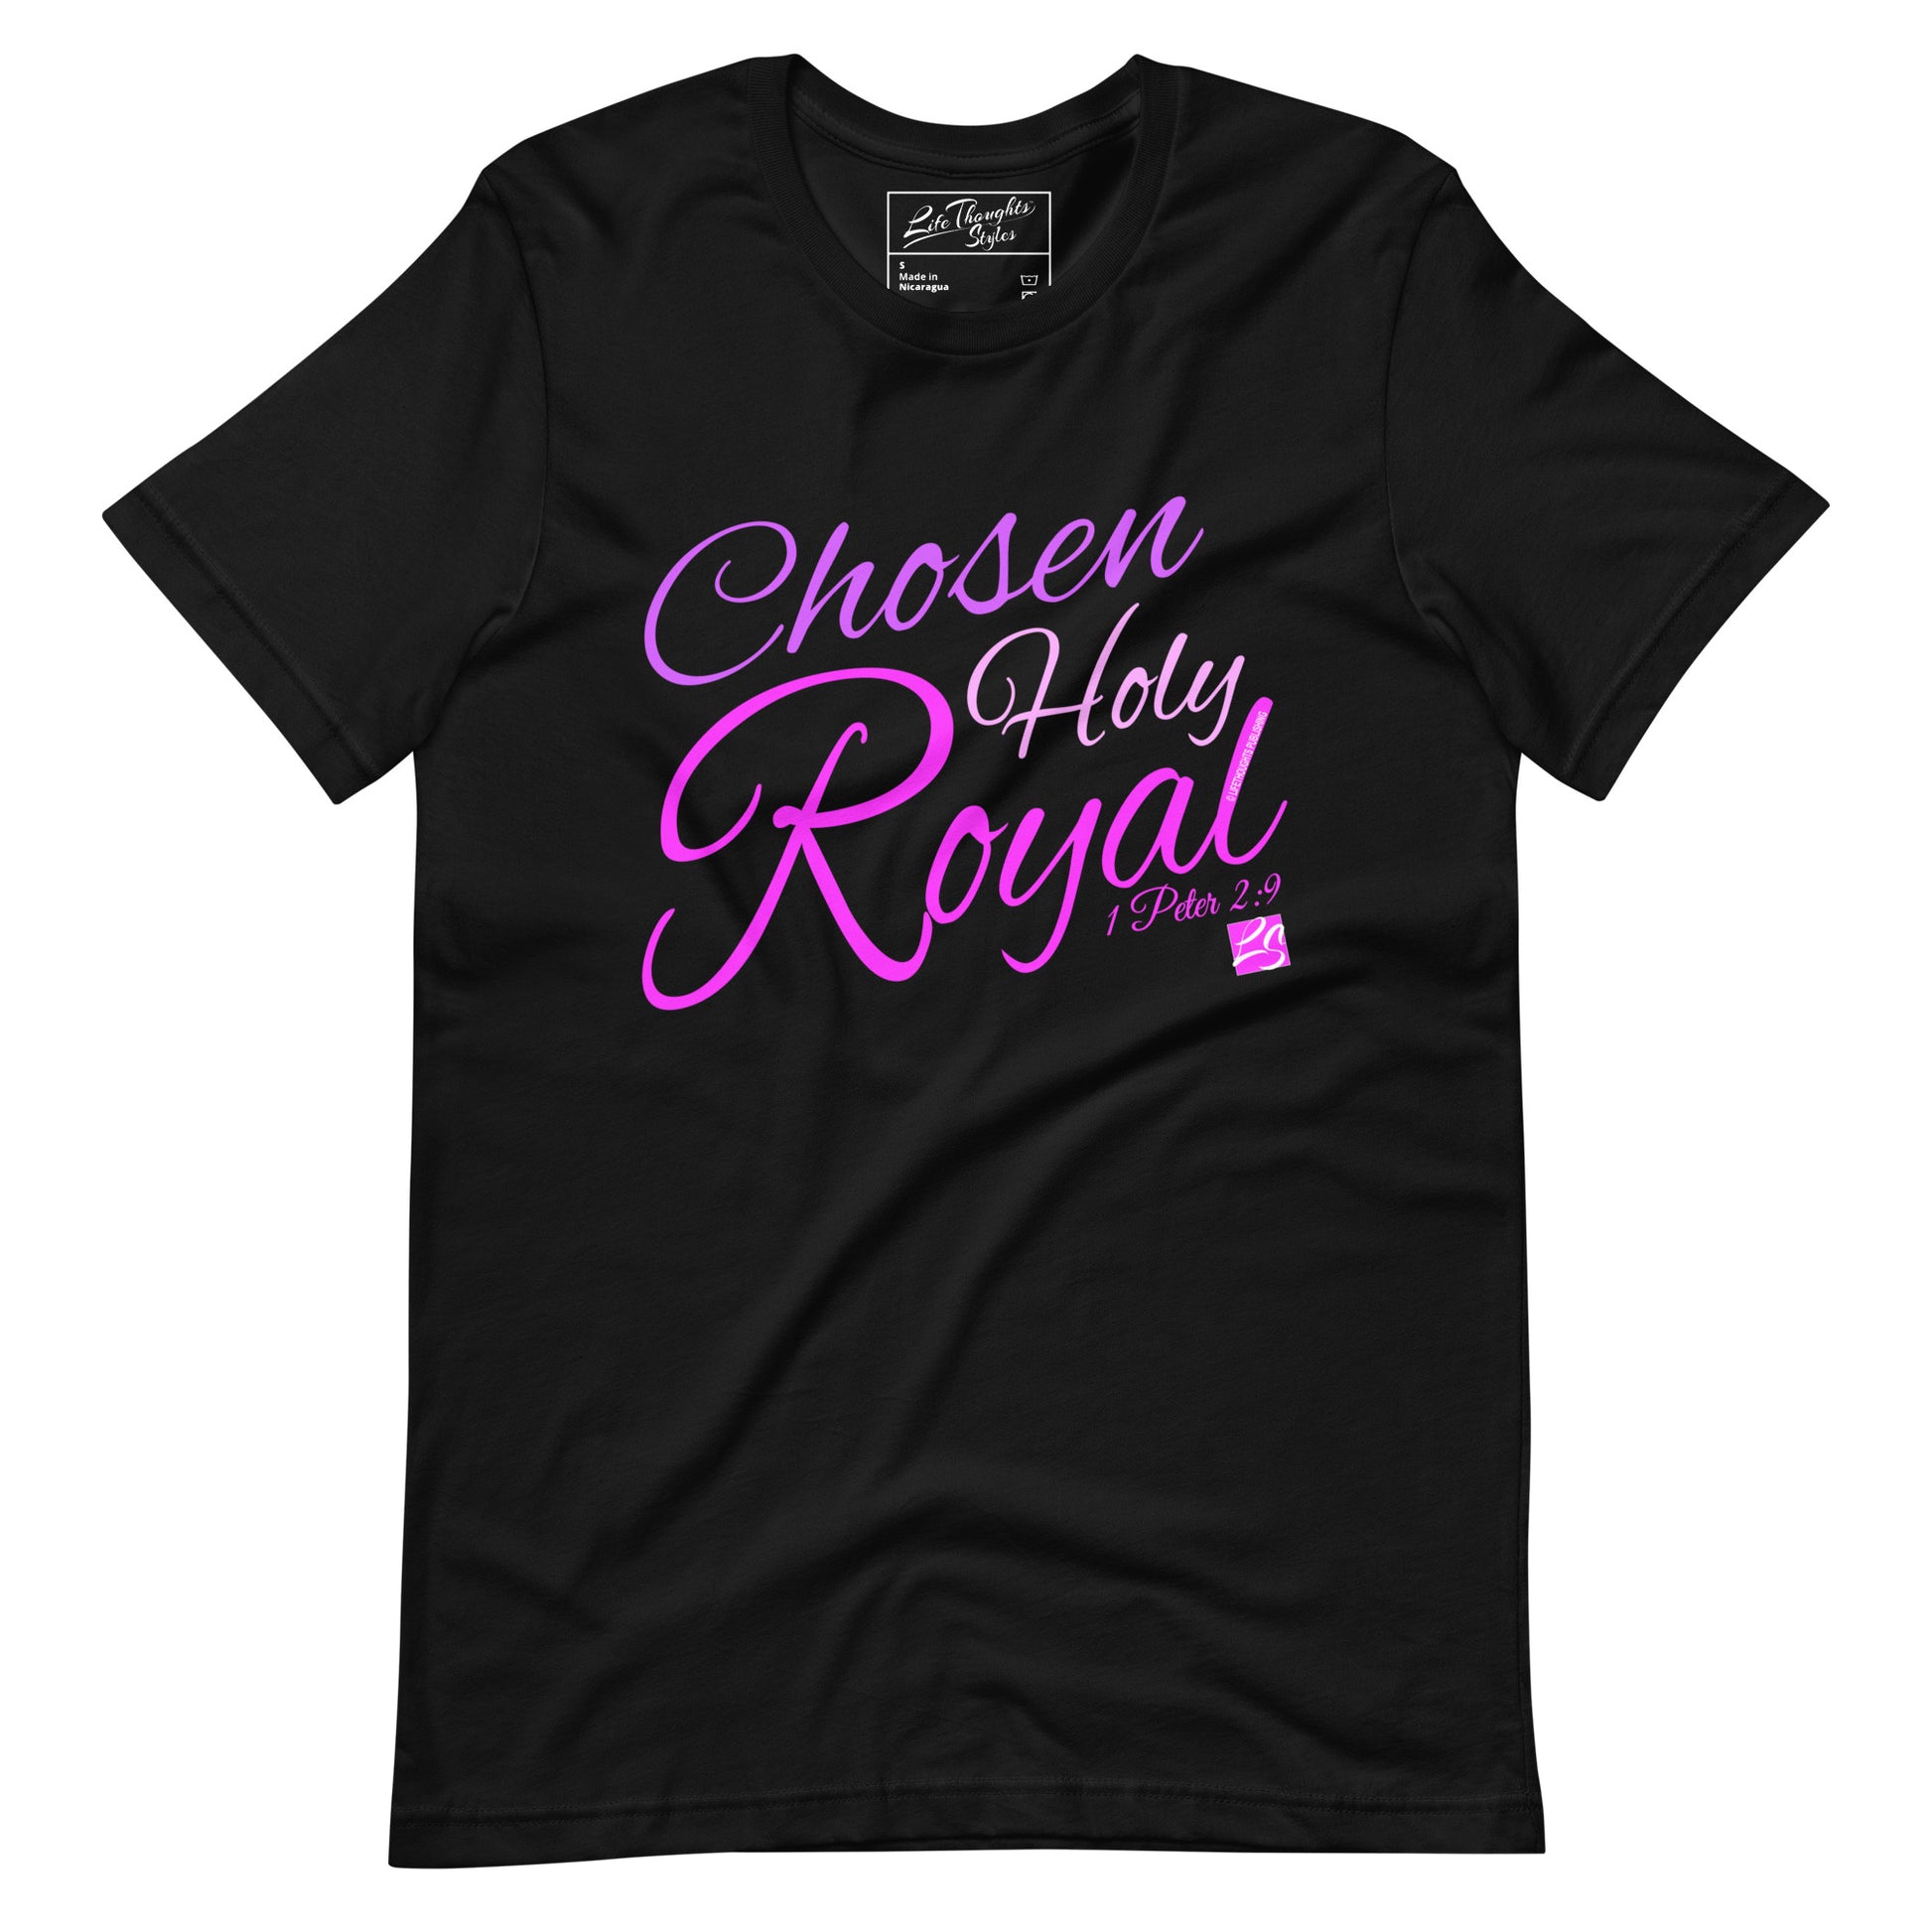 Chosen Holy Royal black tee with purple font 1 Peter 2:9